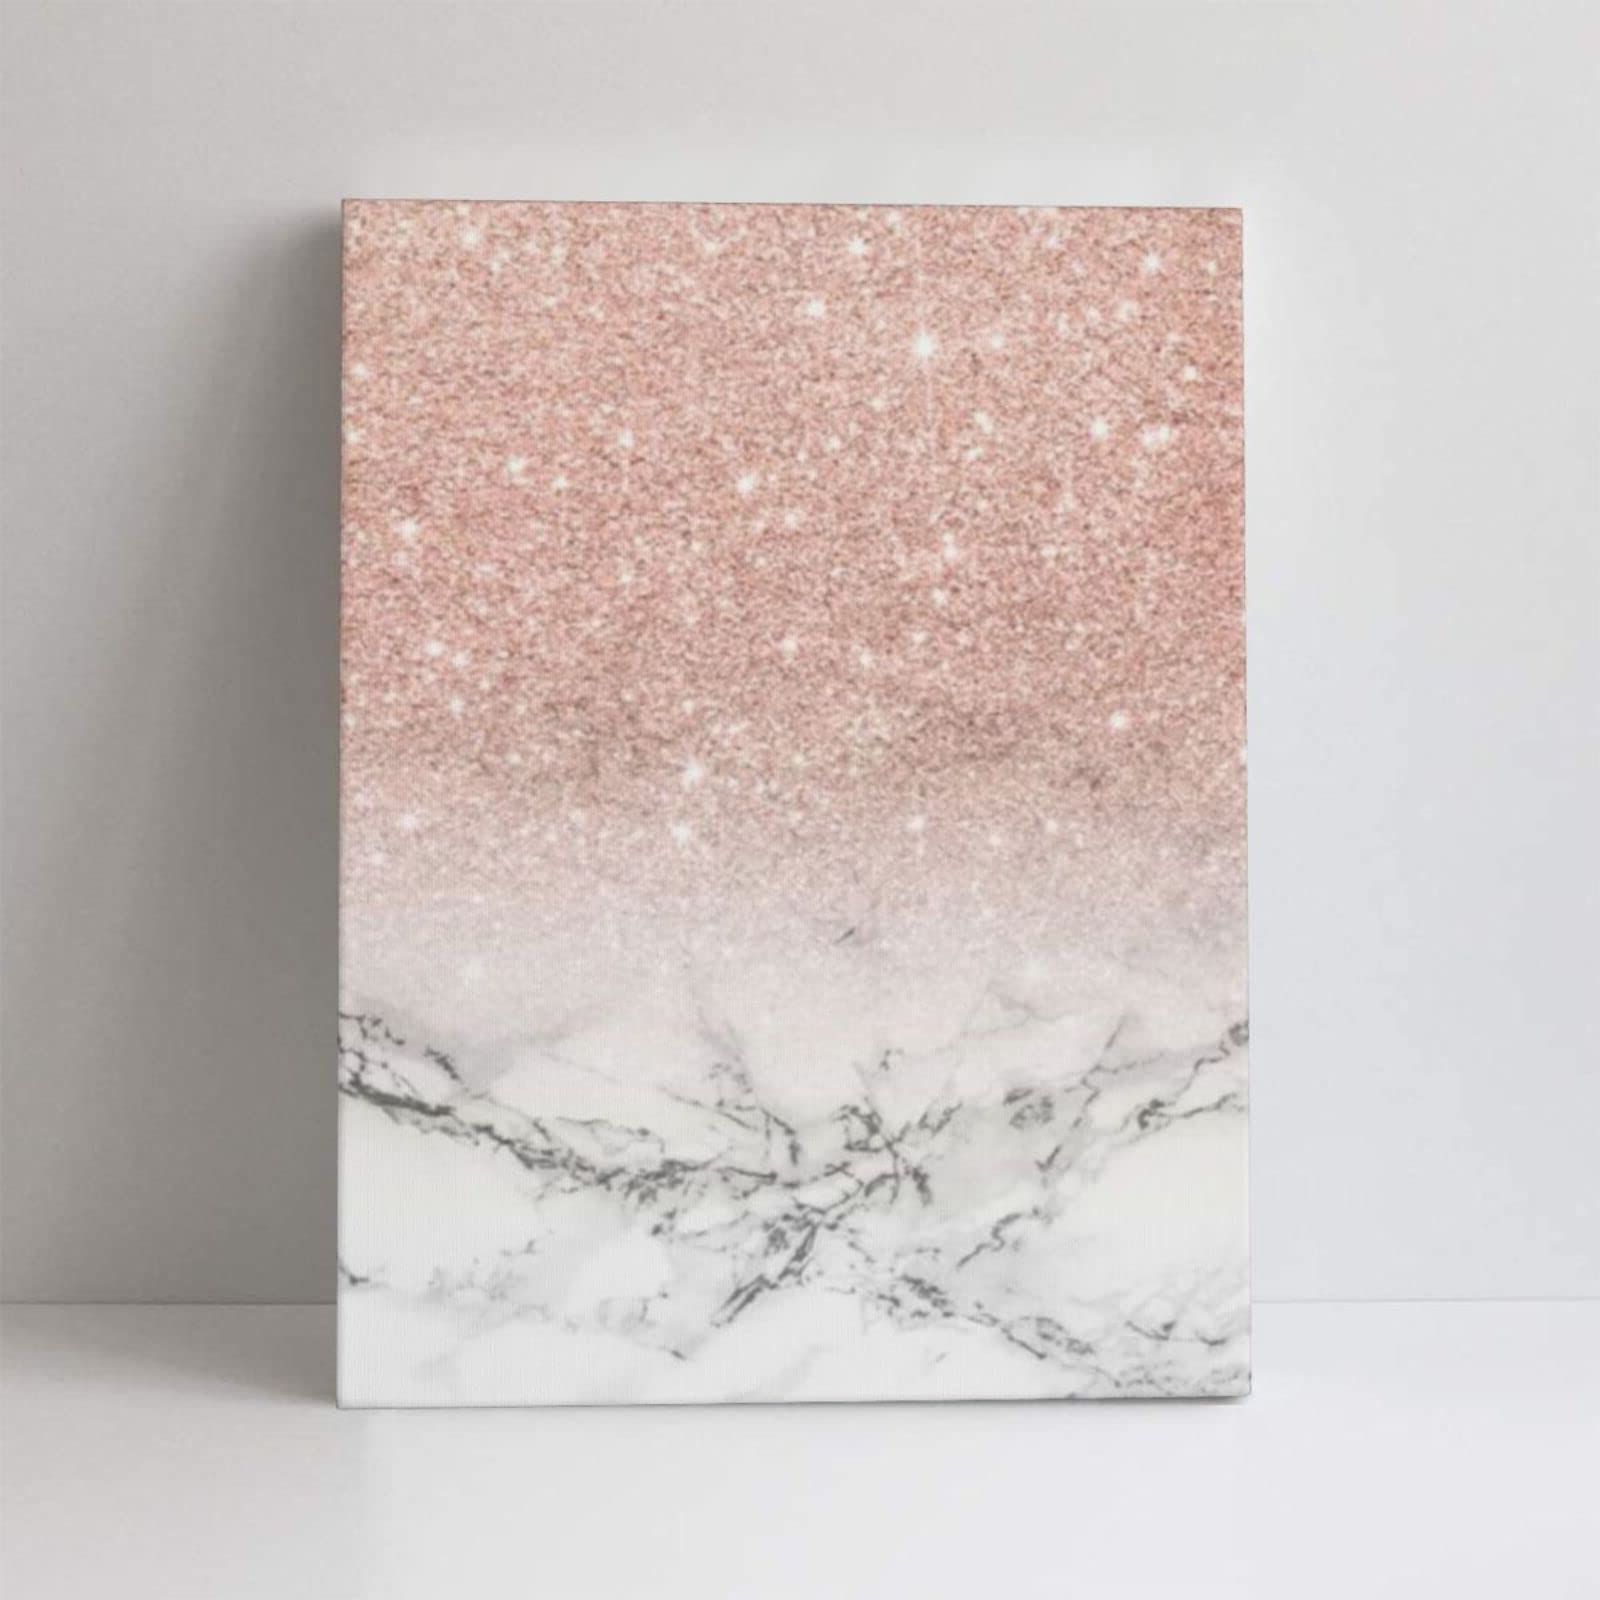 Amazon: Modern Rose Gold Pink Glitter White Marble Wall Art Abstract  Canvas Prints Painting Artwork Wall Decor Home Decoration For Bedroom  Living Room 12"x16": Posters & Prints Within Trendy Glitter Pink Wall Art (View 8 of 15)